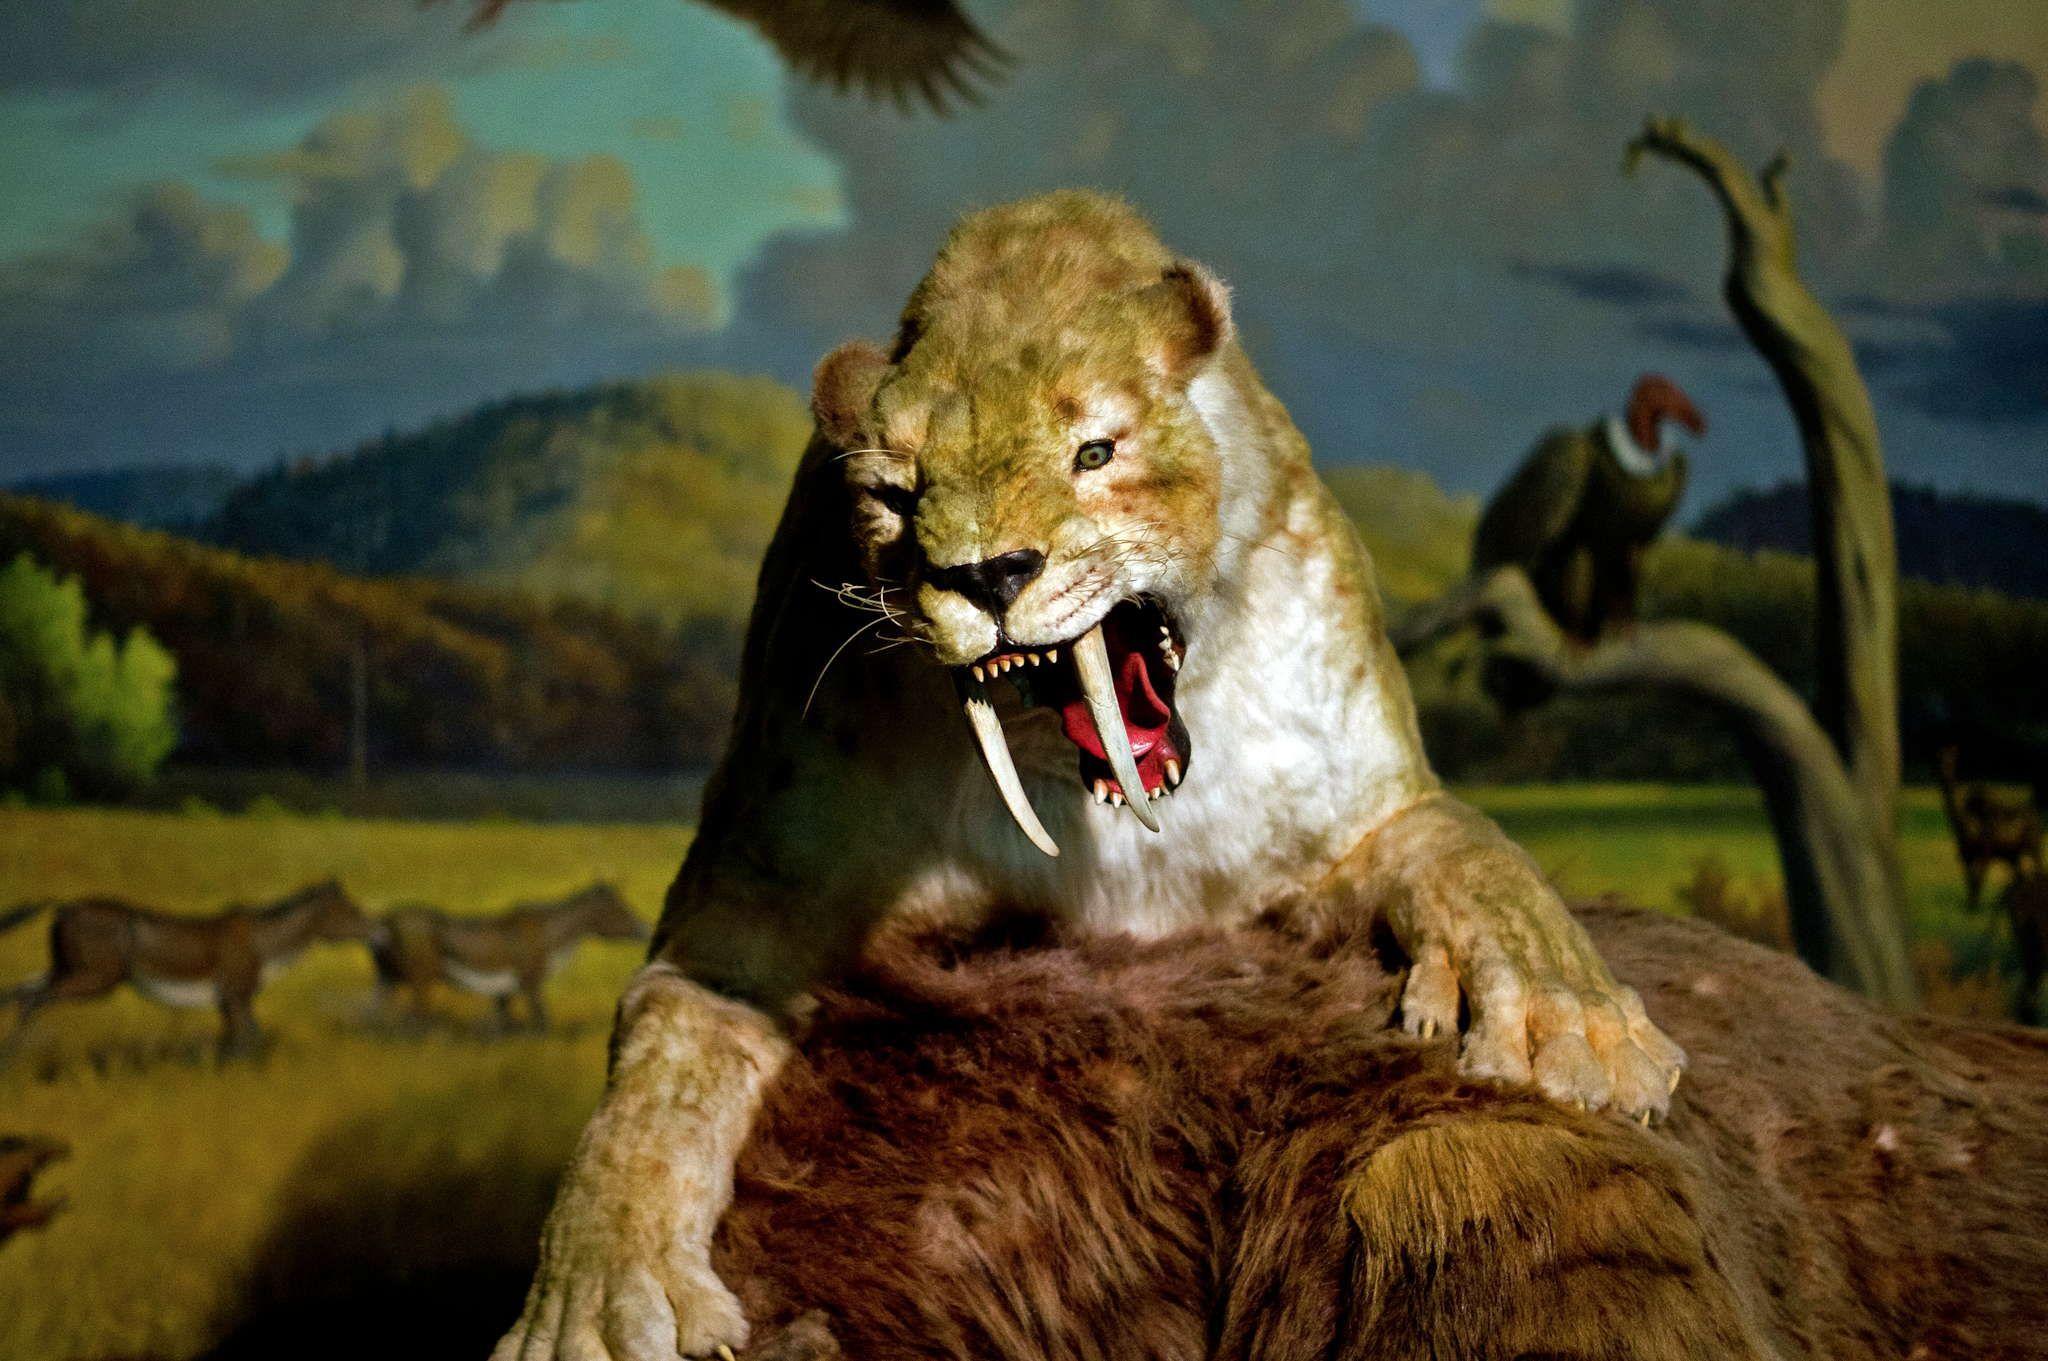 What Was the Diet of a Saber Tooth Tiger?